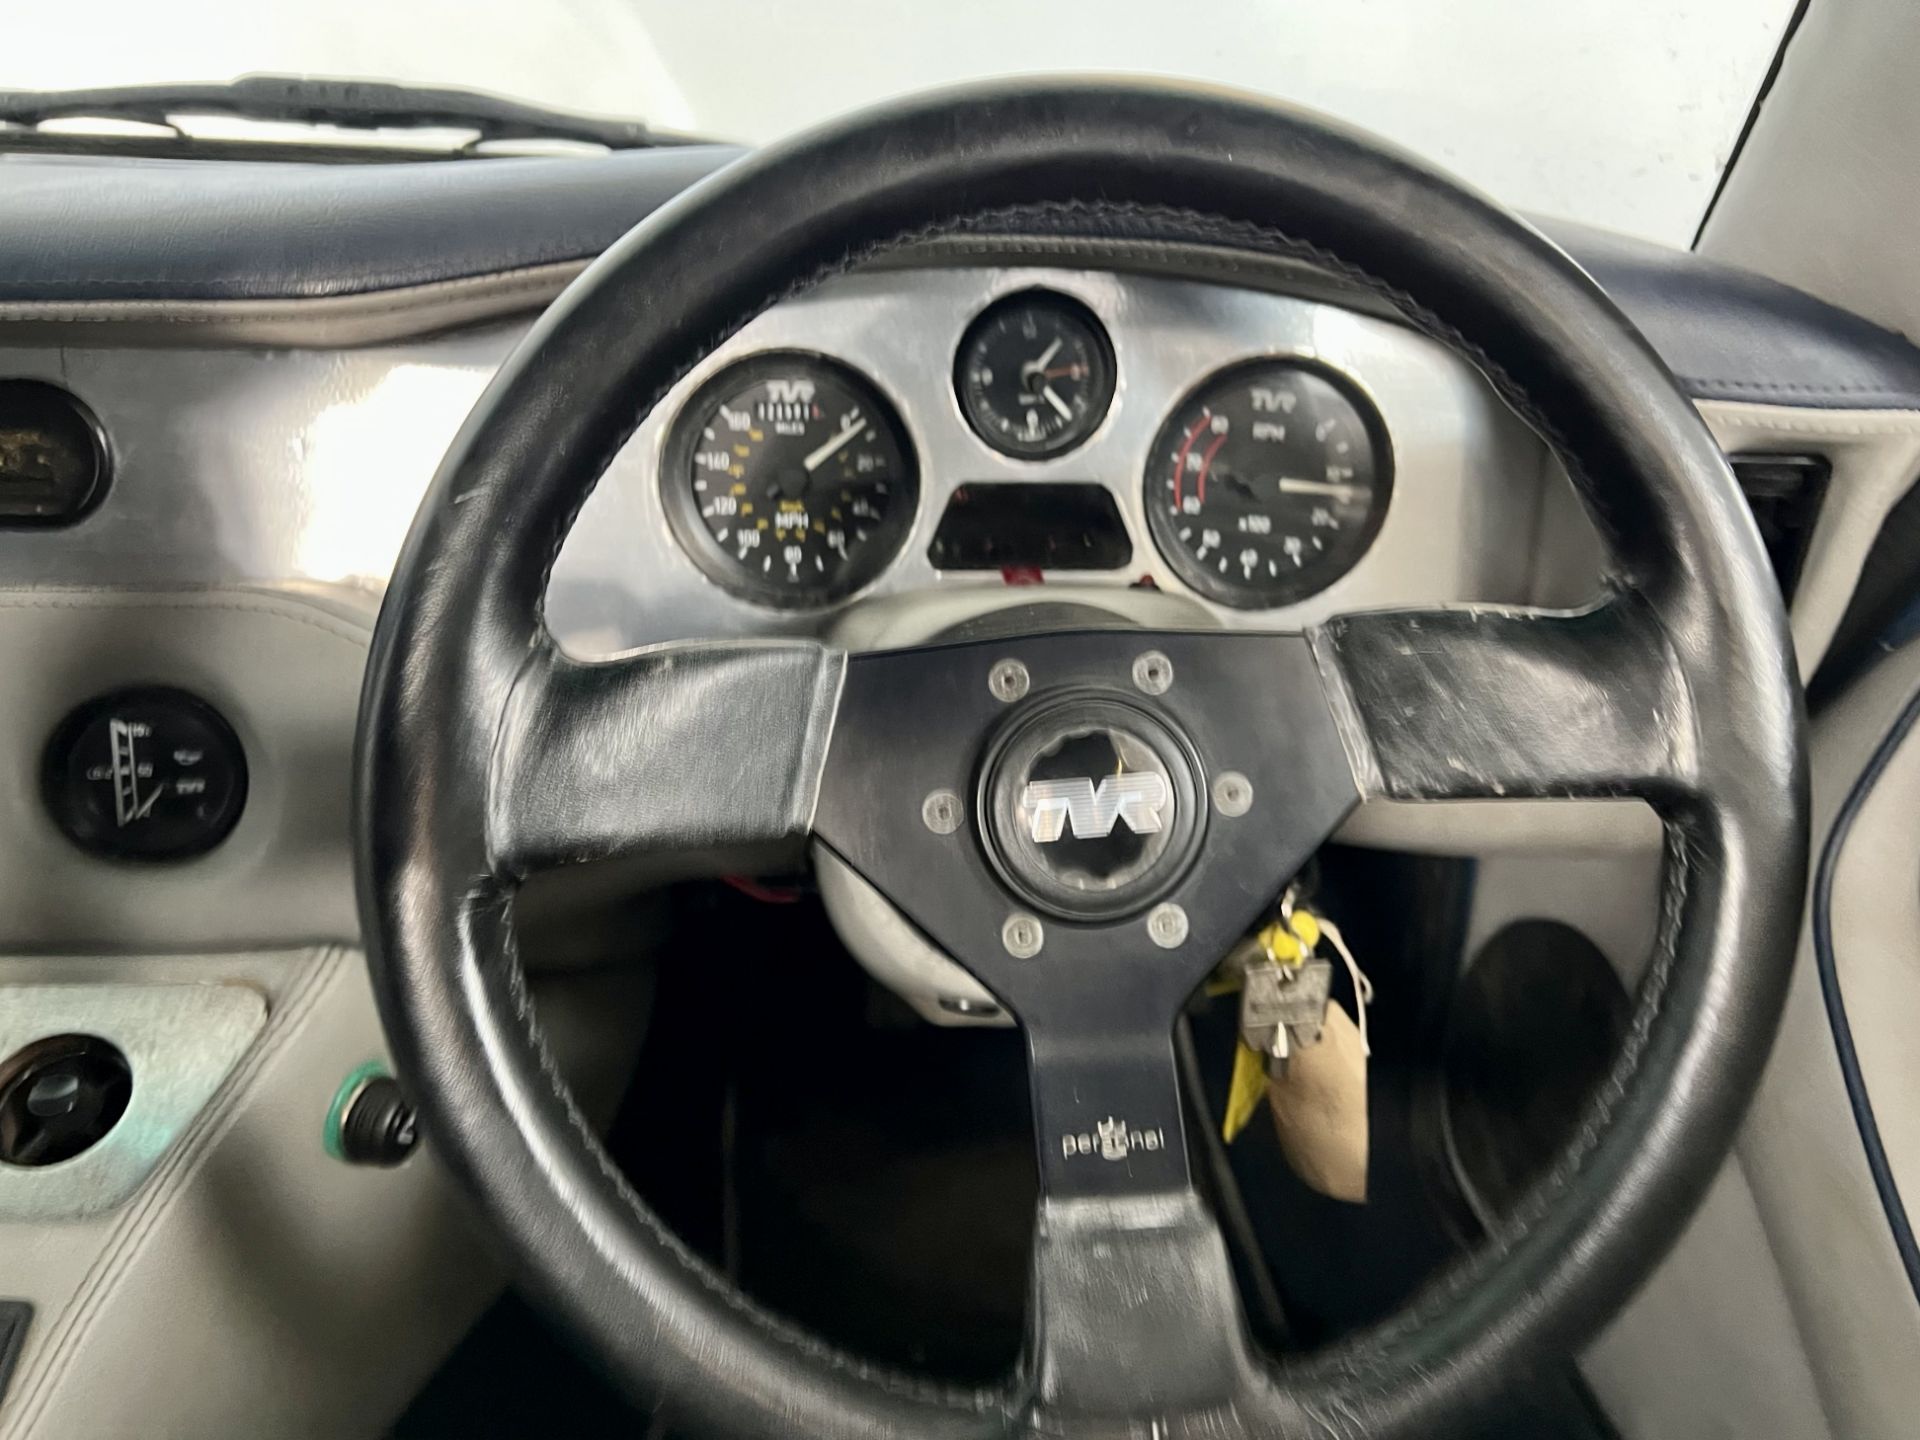 TVR S2 - Image 25 of 29